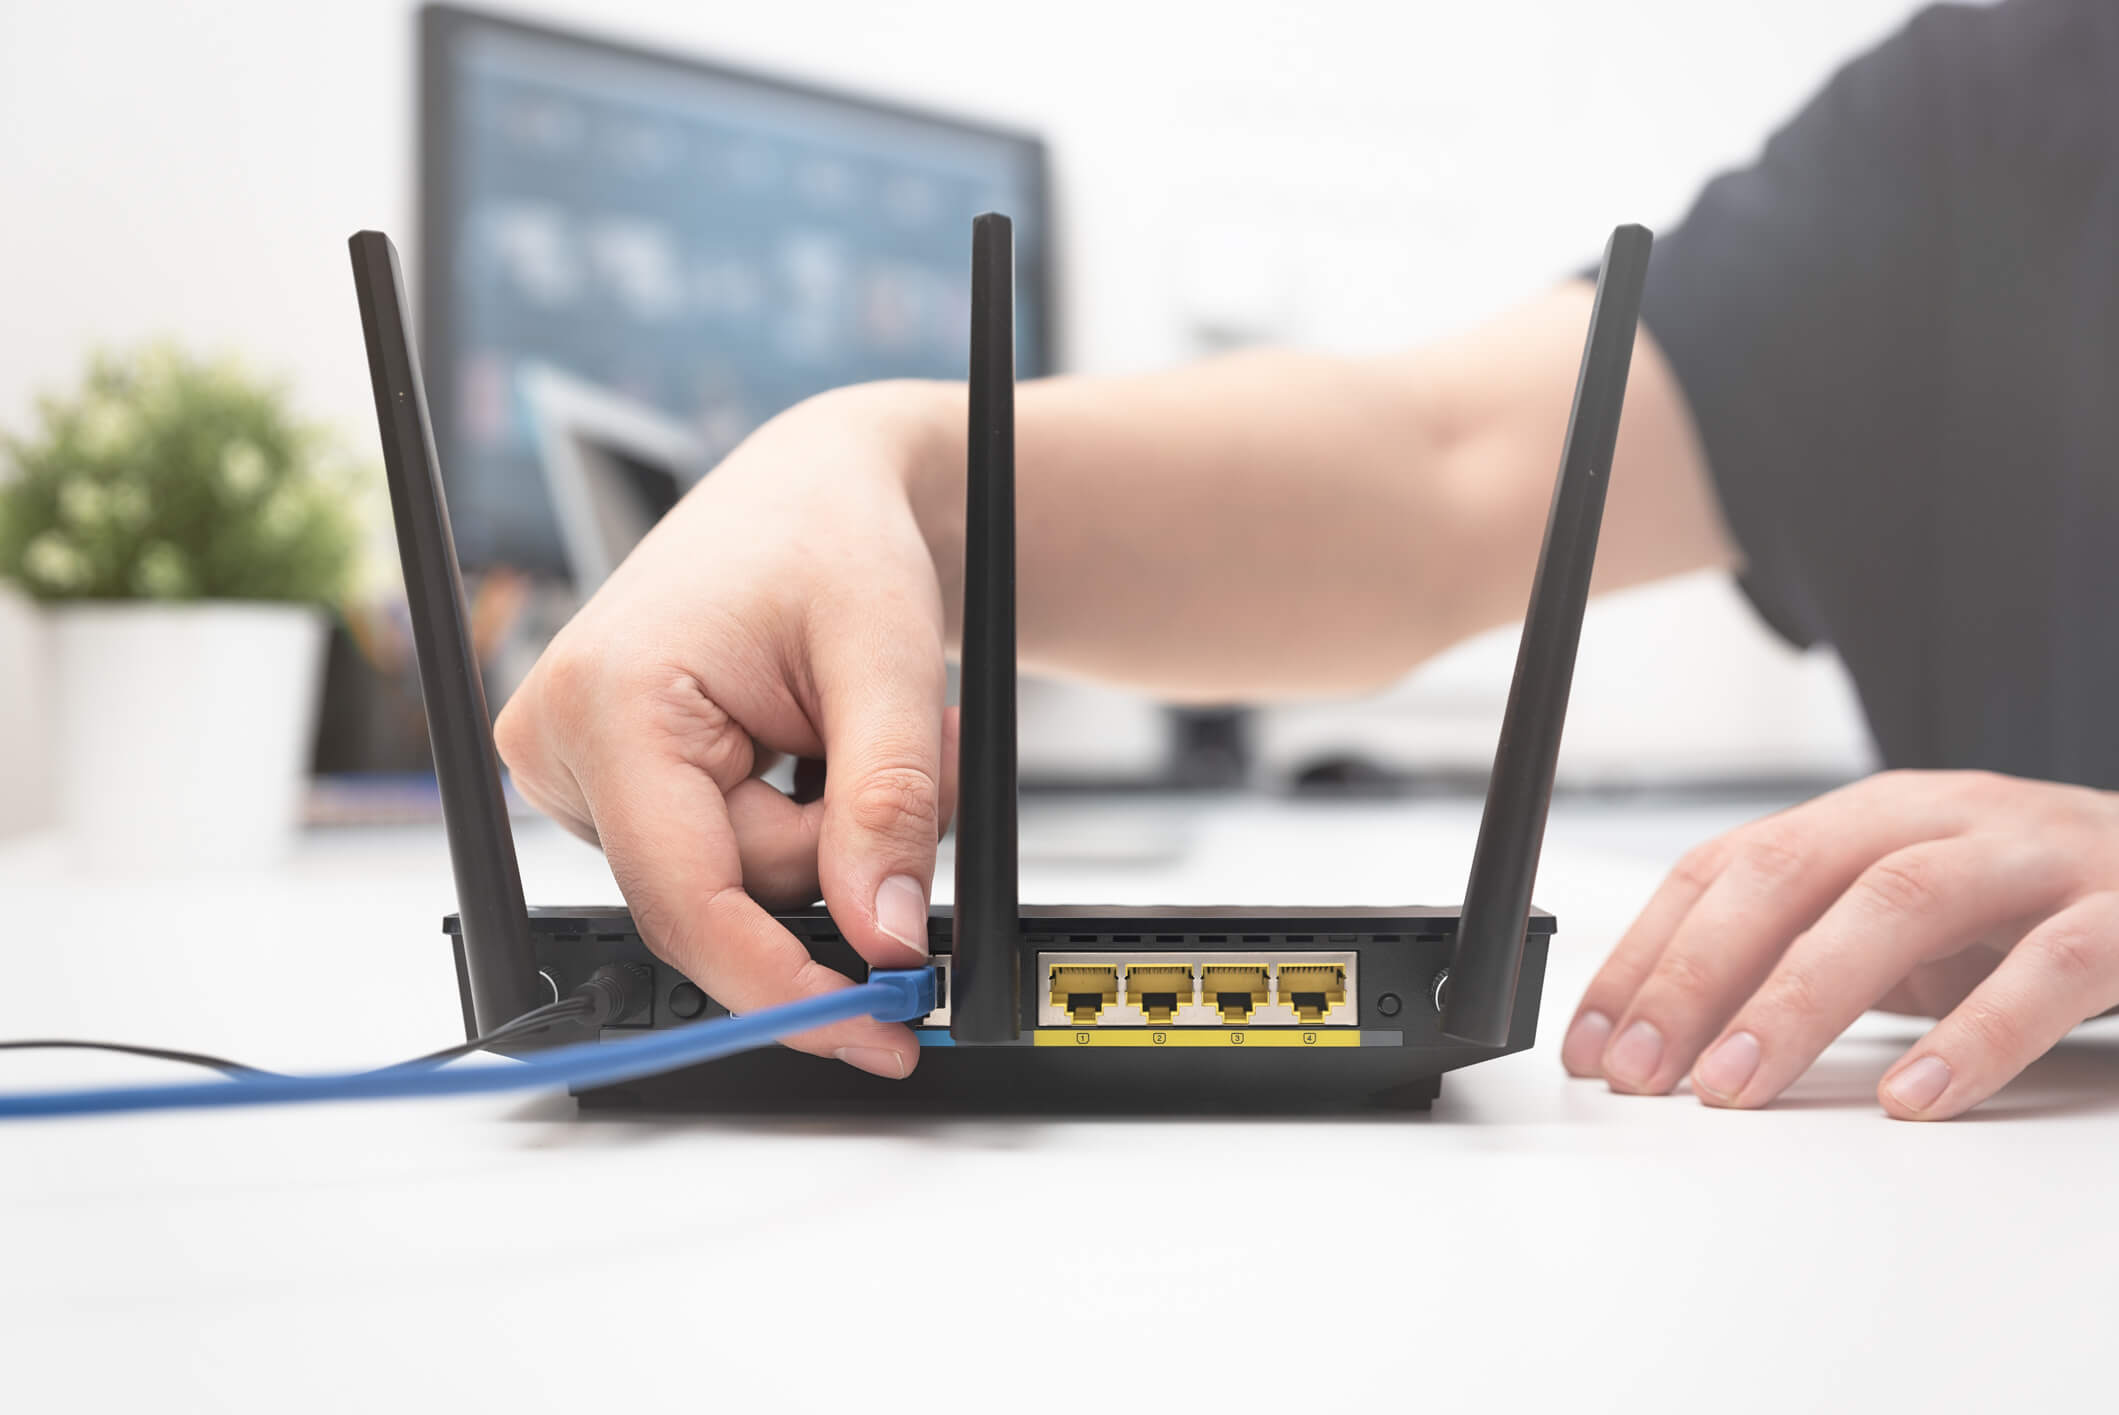 Wi-Fi vs Ethernet Networks for Business